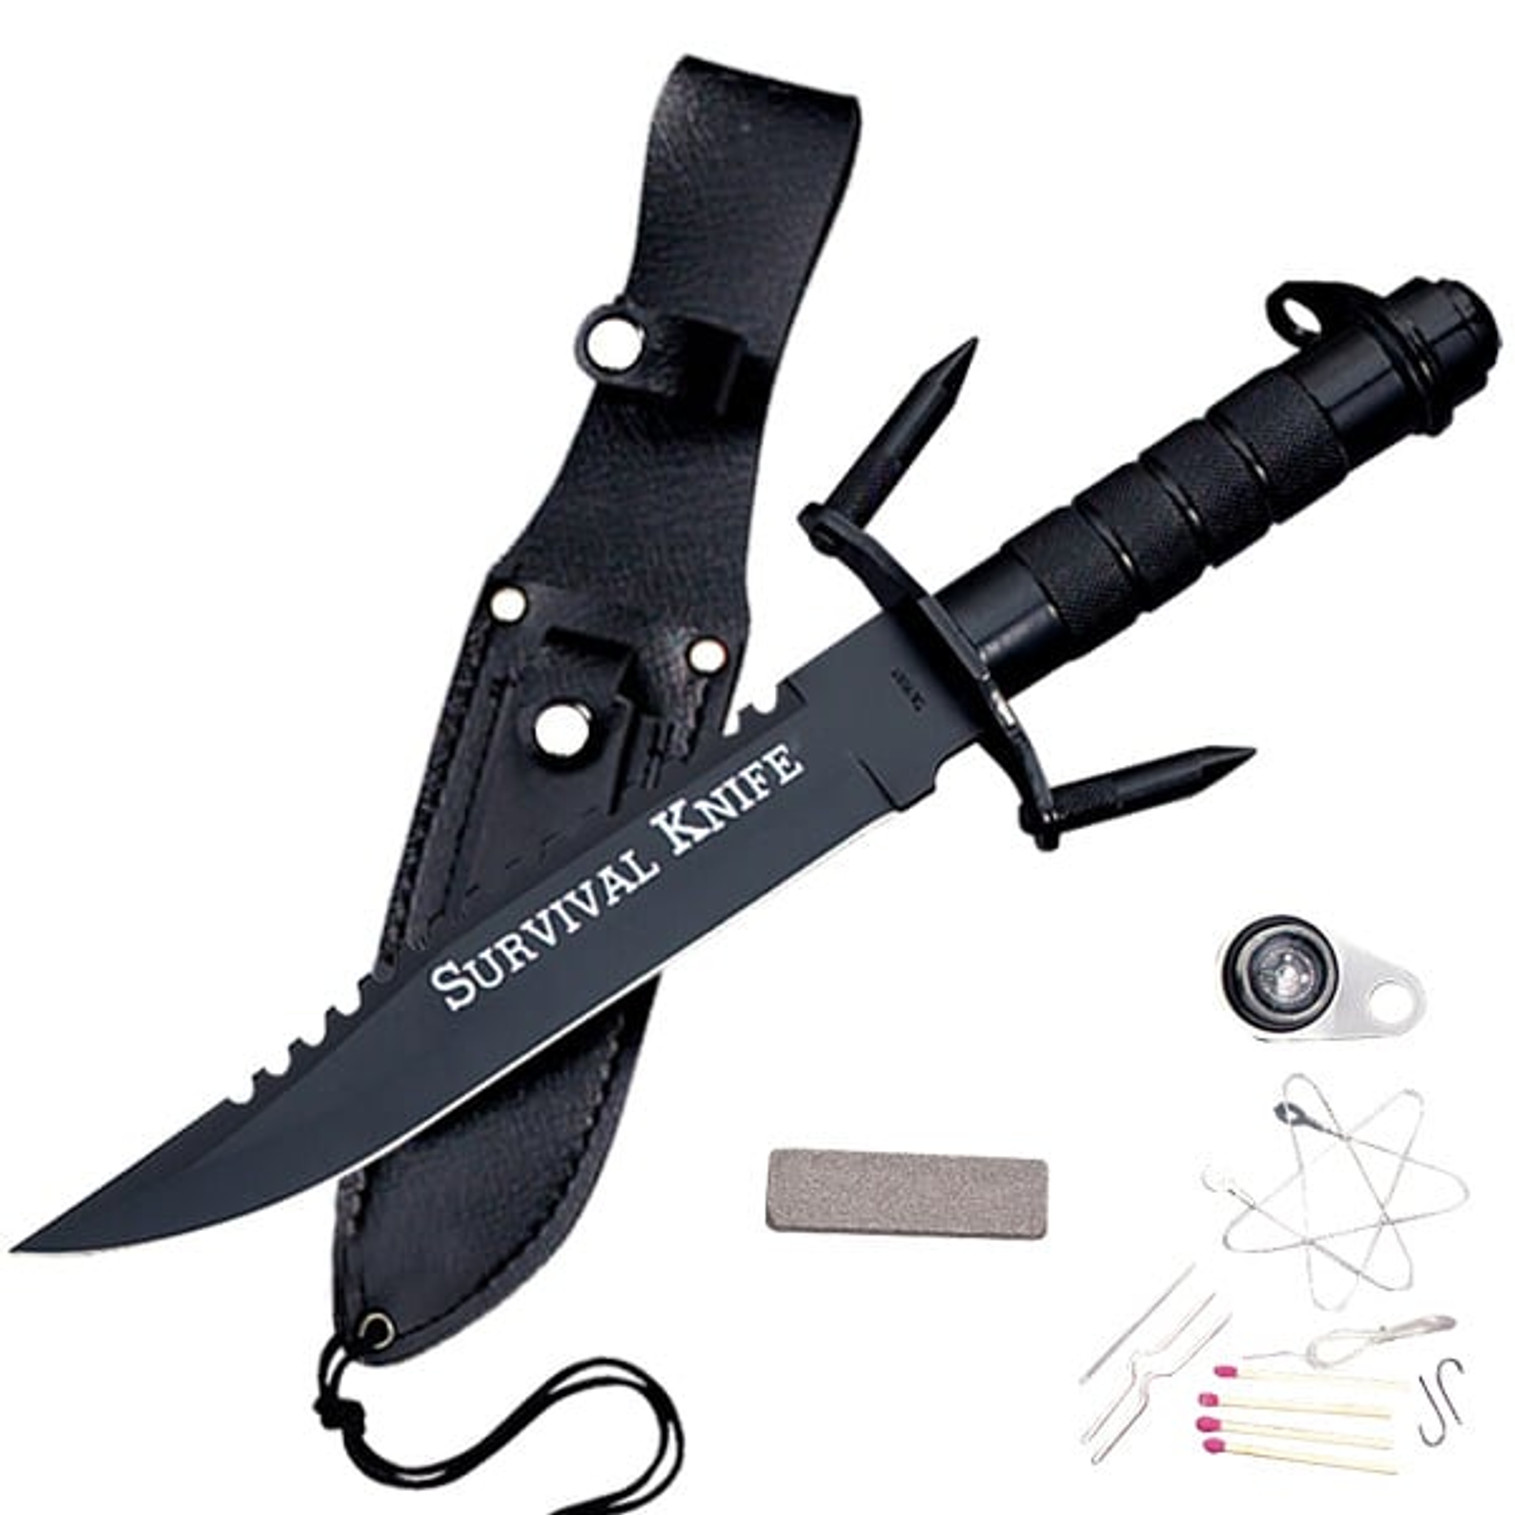 Rambo Style Spiked Survival Knife - Black 